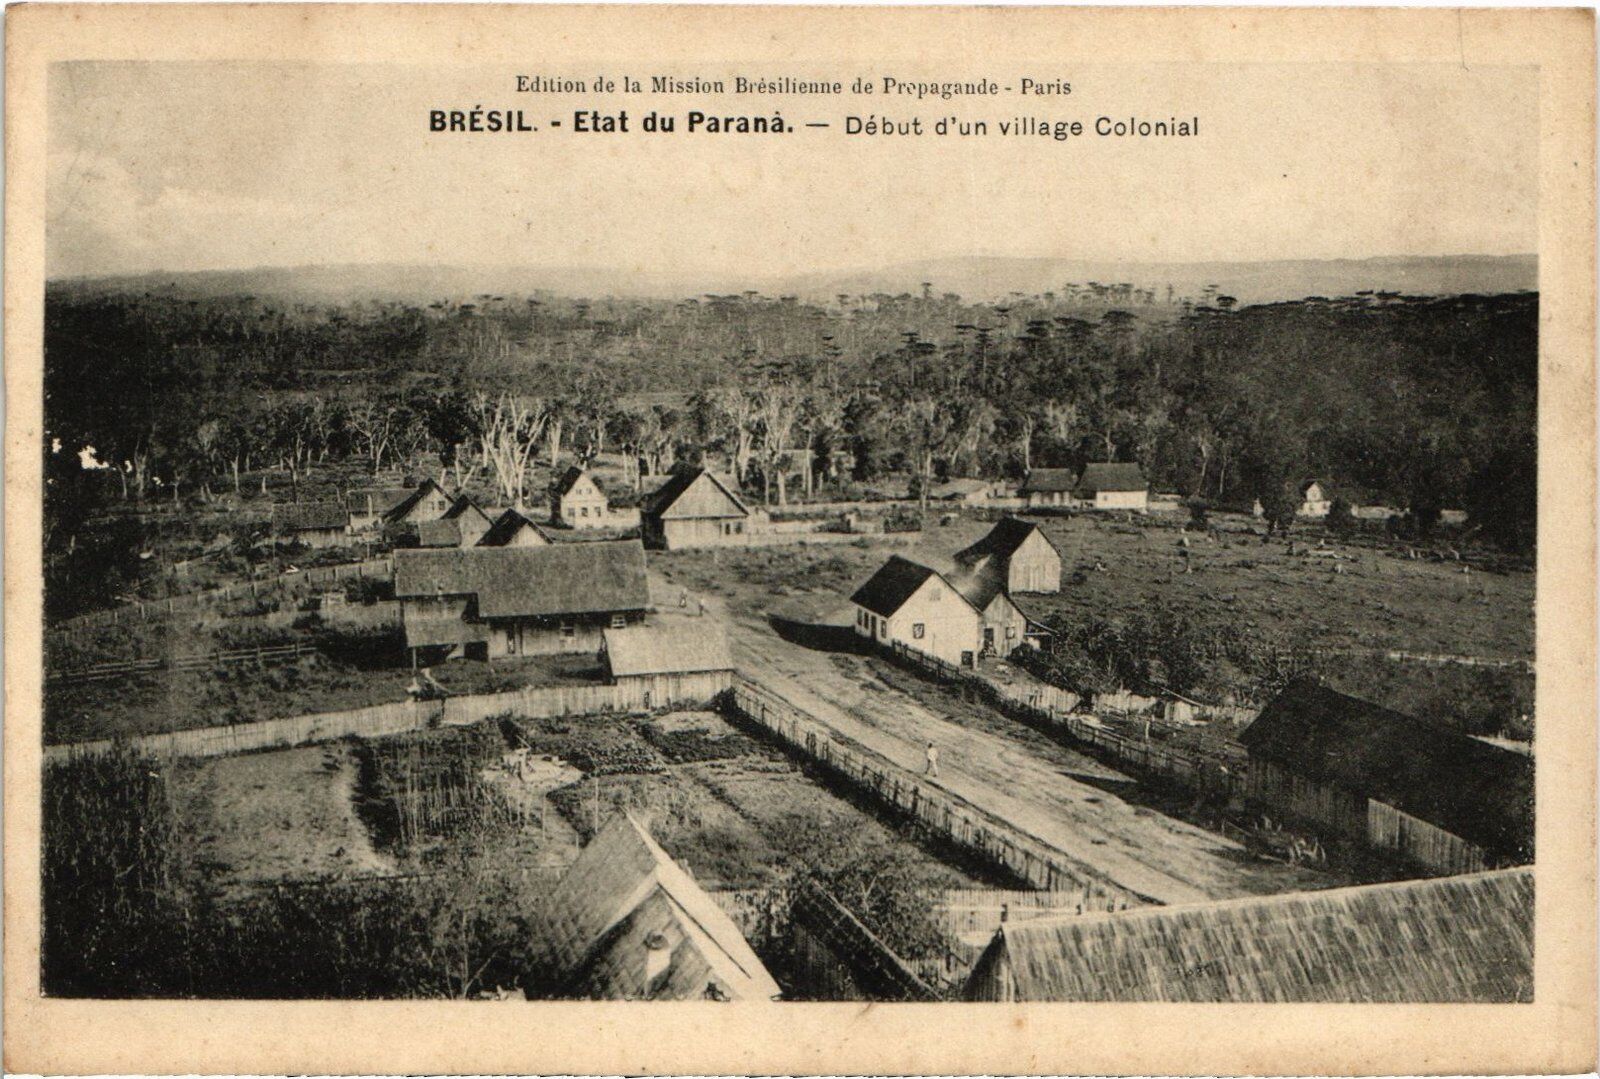 PC BRAZIL STATE OF PARANA DEBUT OF A COLONIAL VILLAGE (a4669)